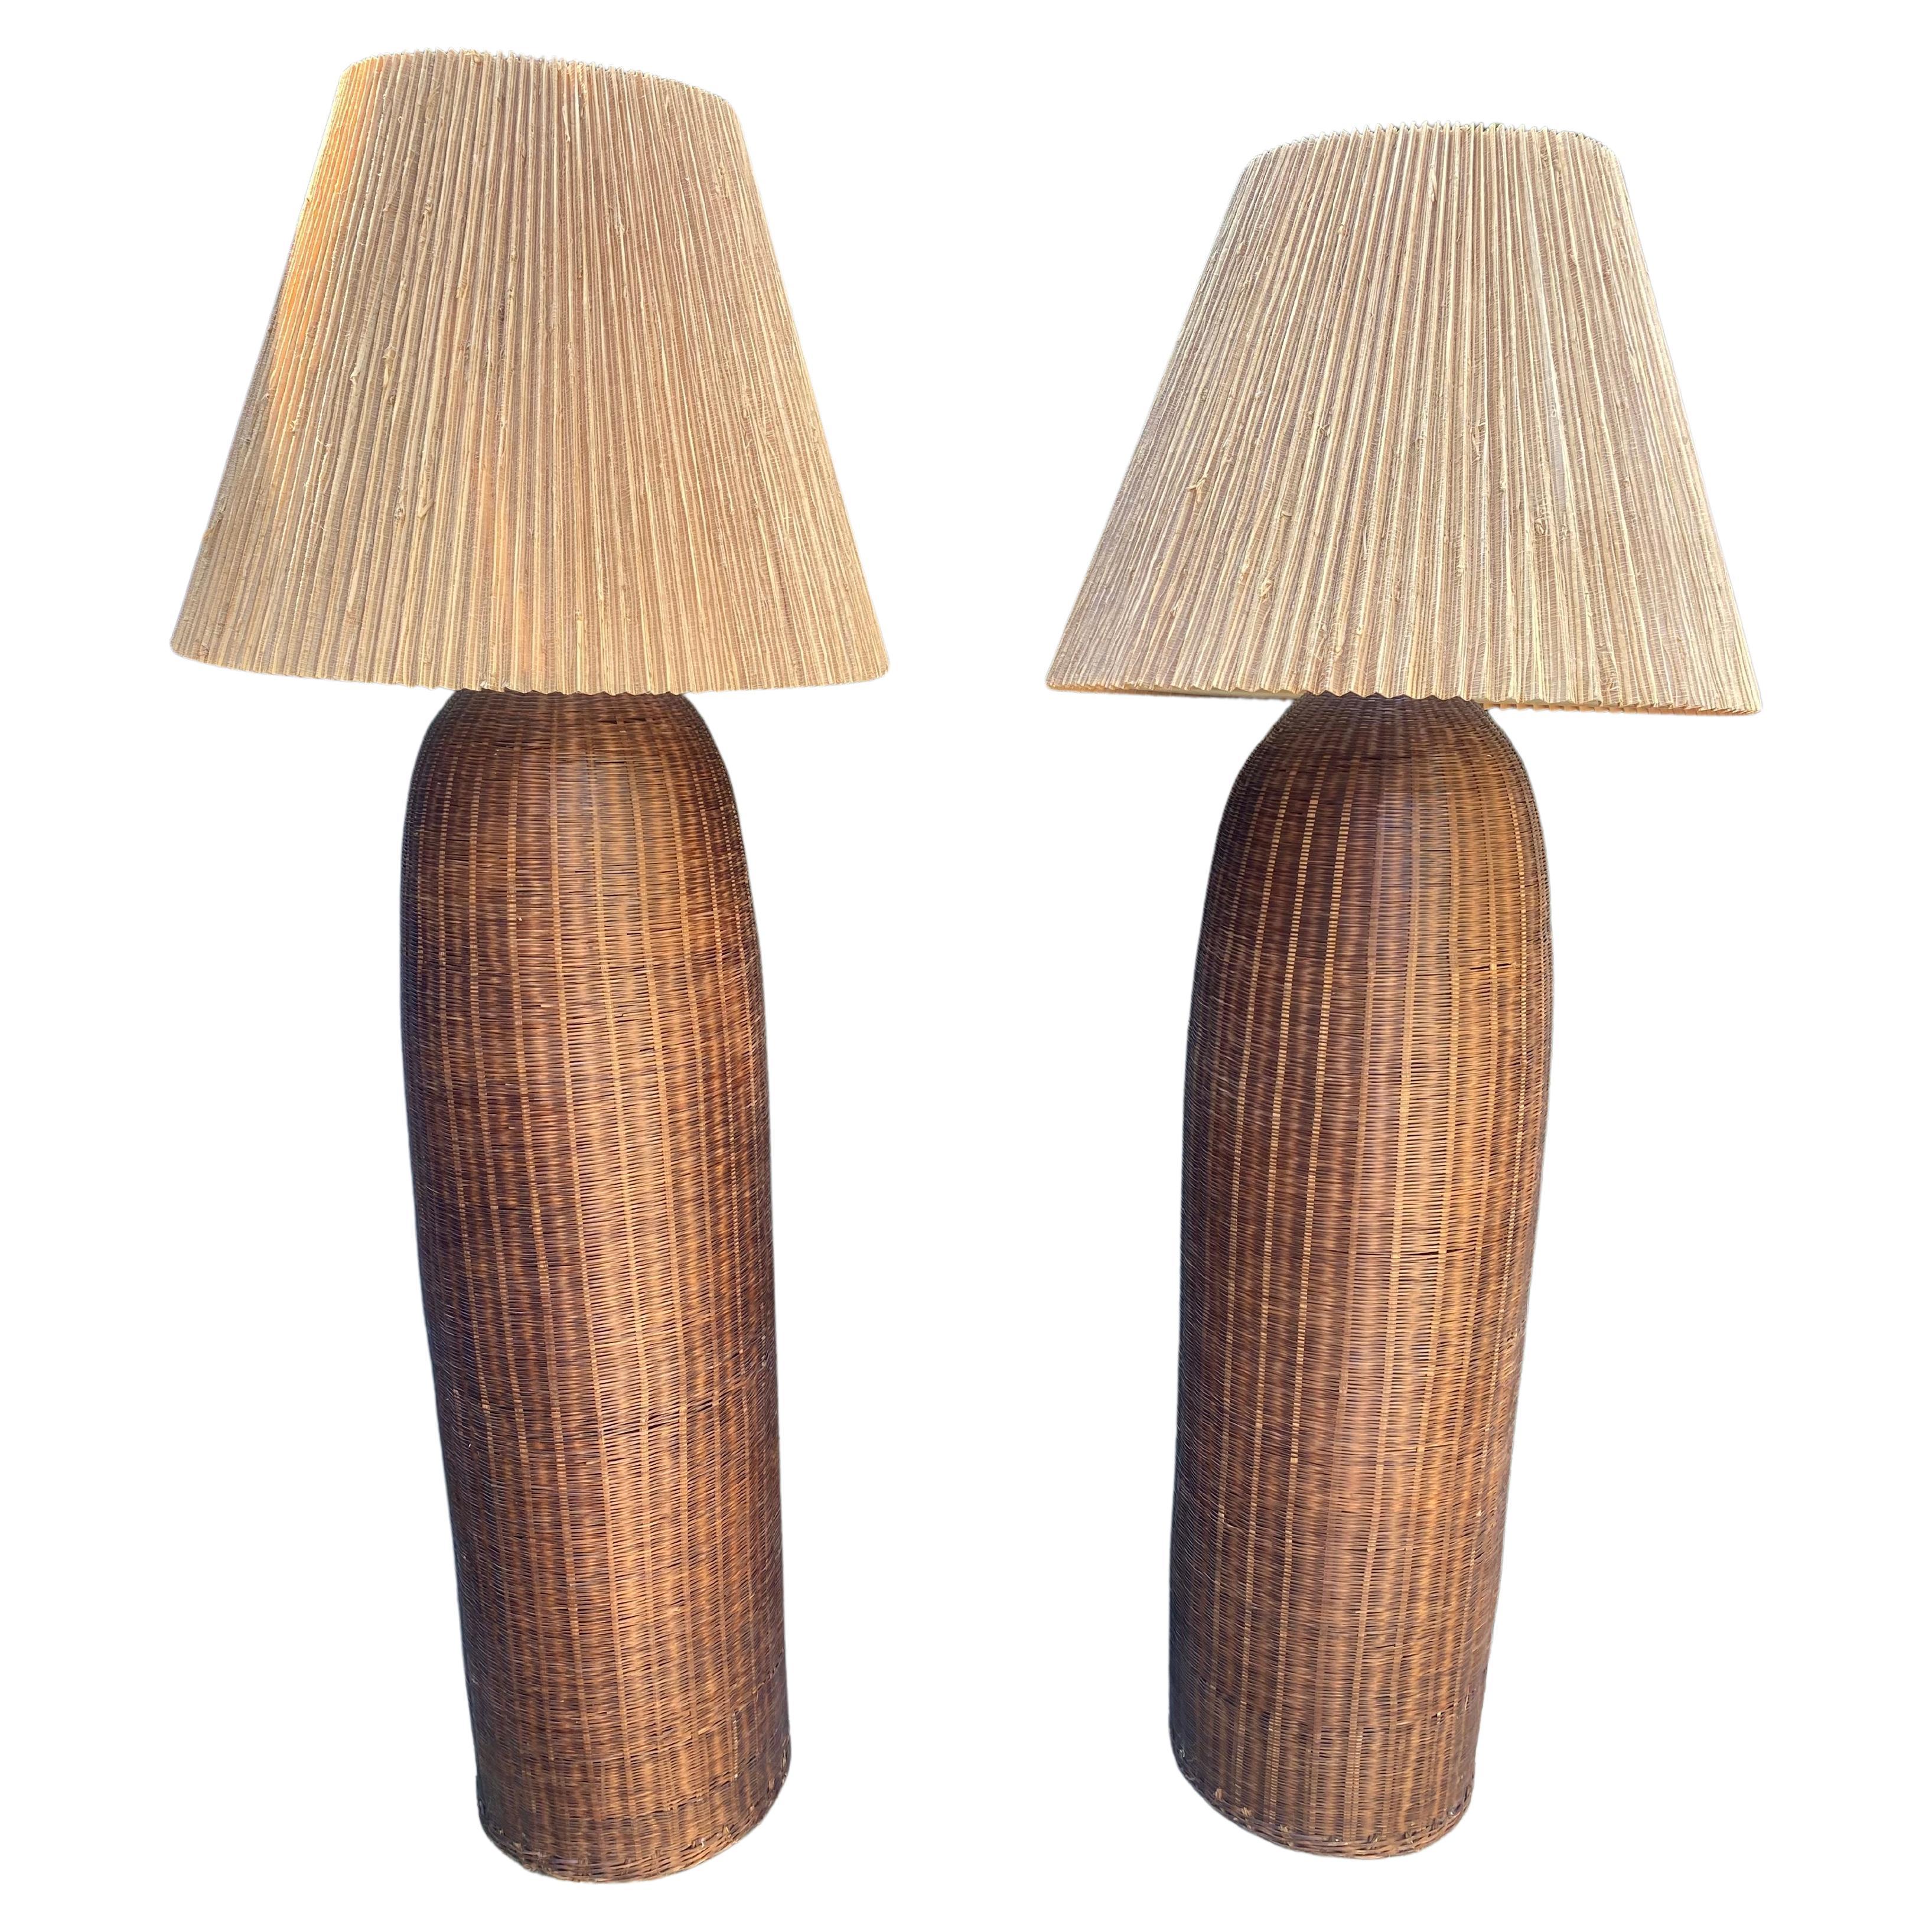 1970s Fine Rattan Wicker Vessel Floor Lamps With Shades, Set of 2 For Sale